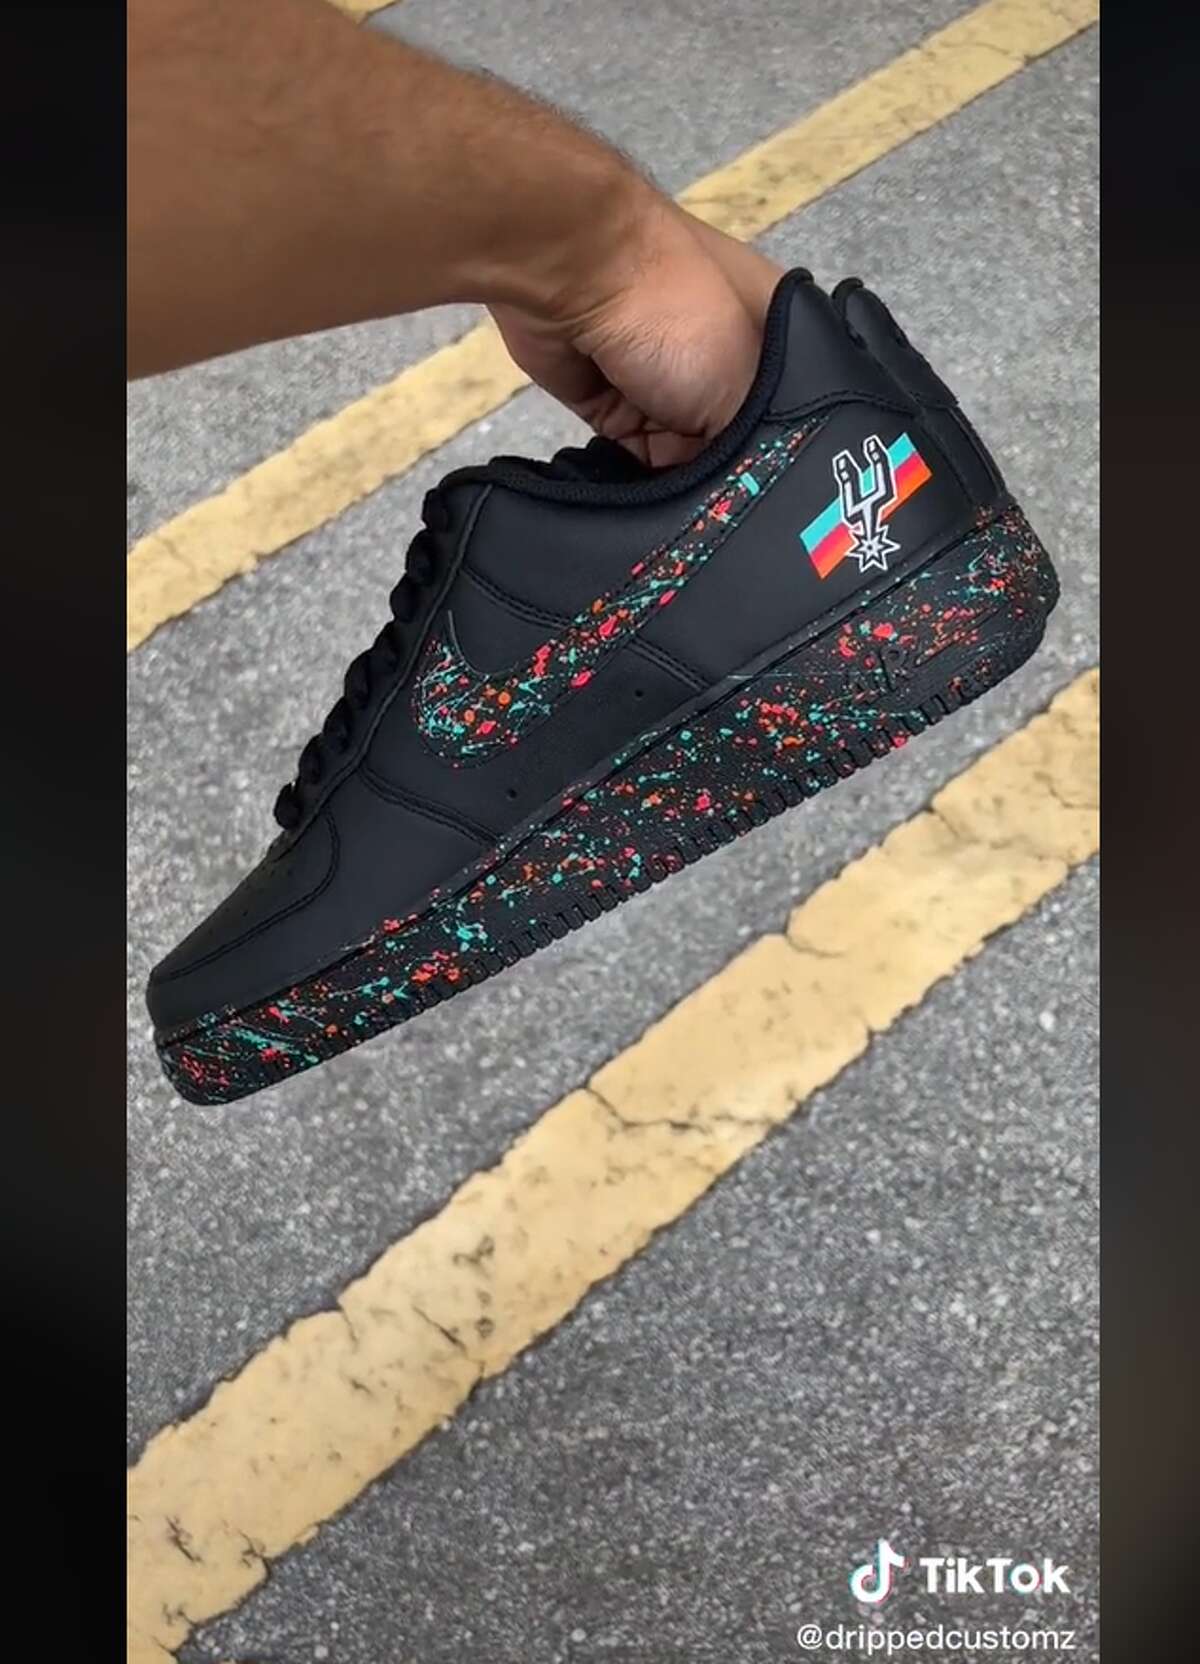 A screenshot of a TikTok video showing how a user customized Nike shoes into a San Antonio Spurs-inspired shoe with Fiesta colors.